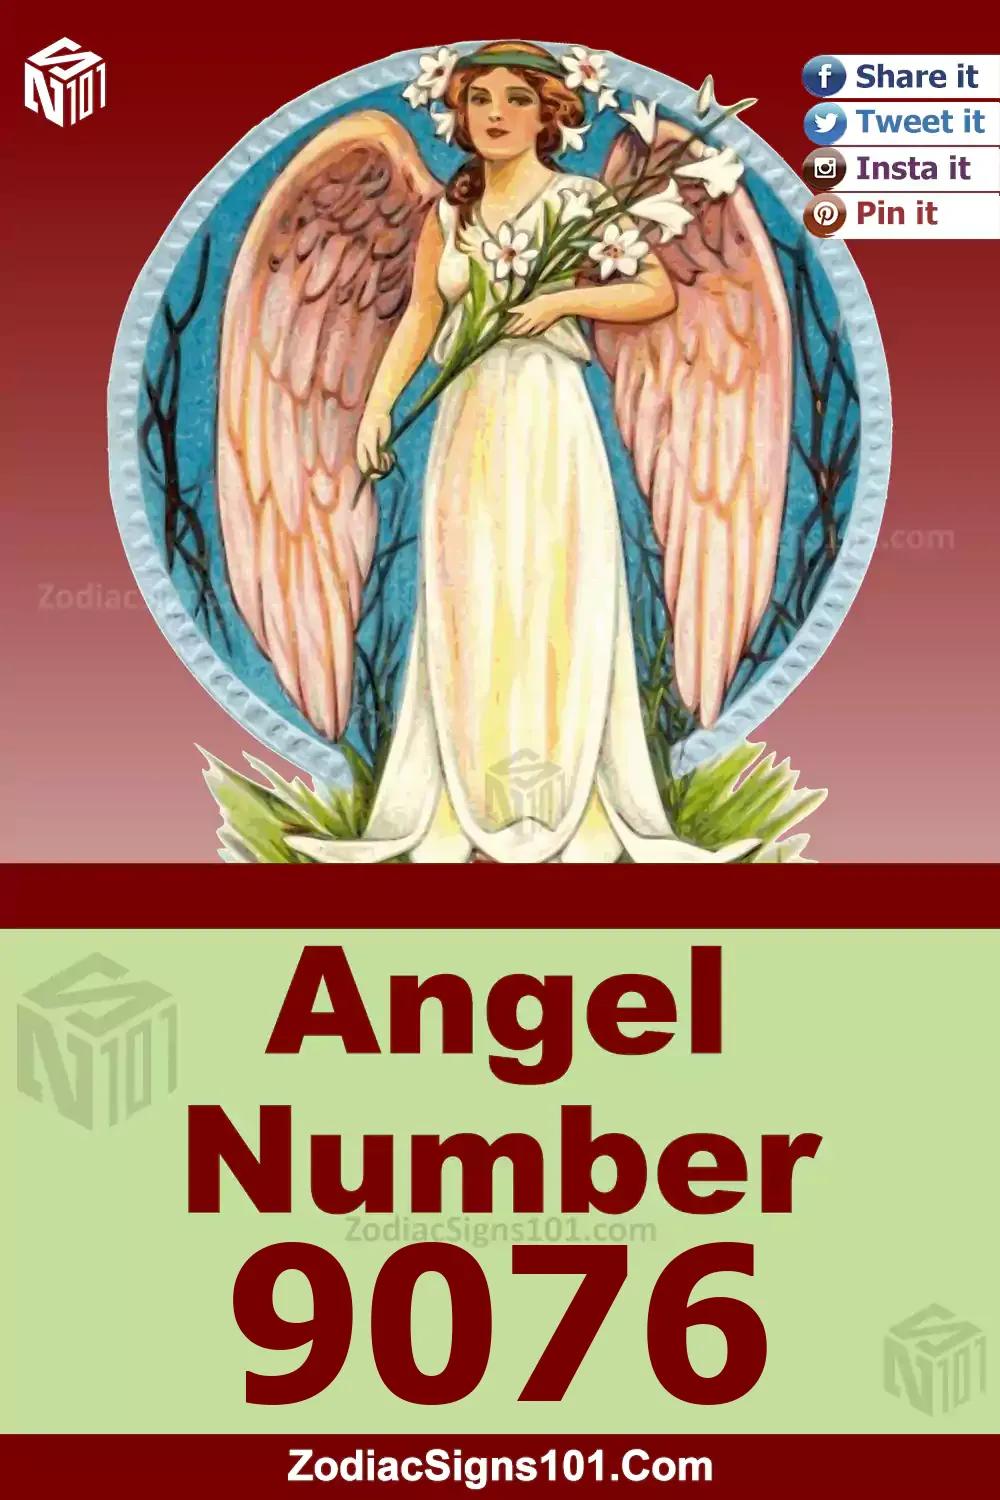 9076 Angel Number Meaning